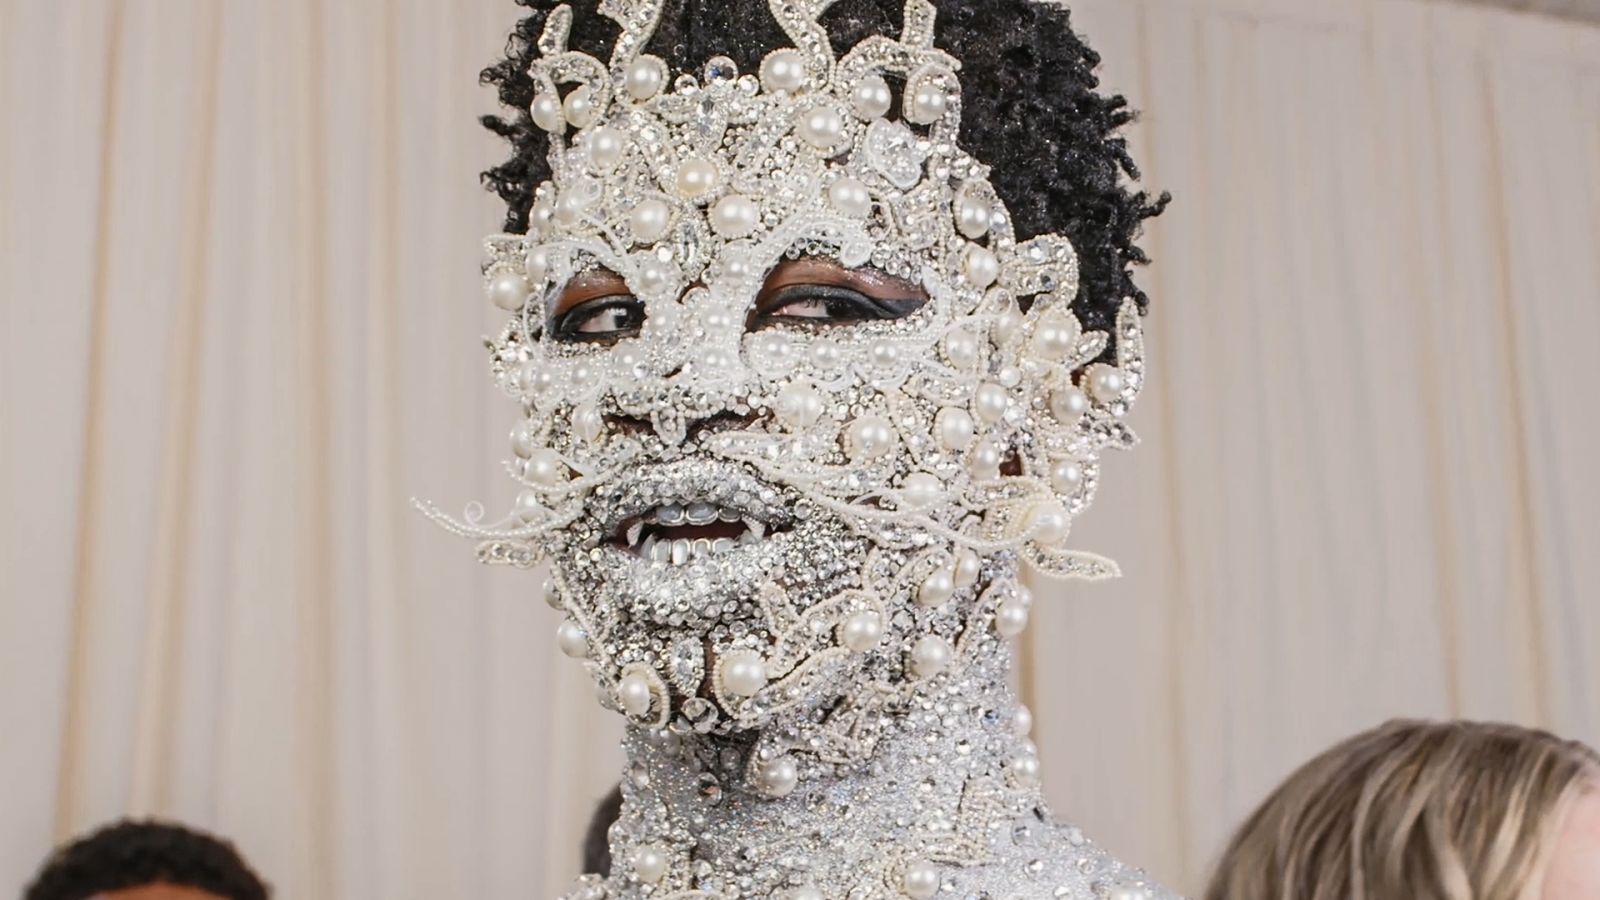 Lil Nas X Arrives at the Met Gala in Head-to-Toe Silver